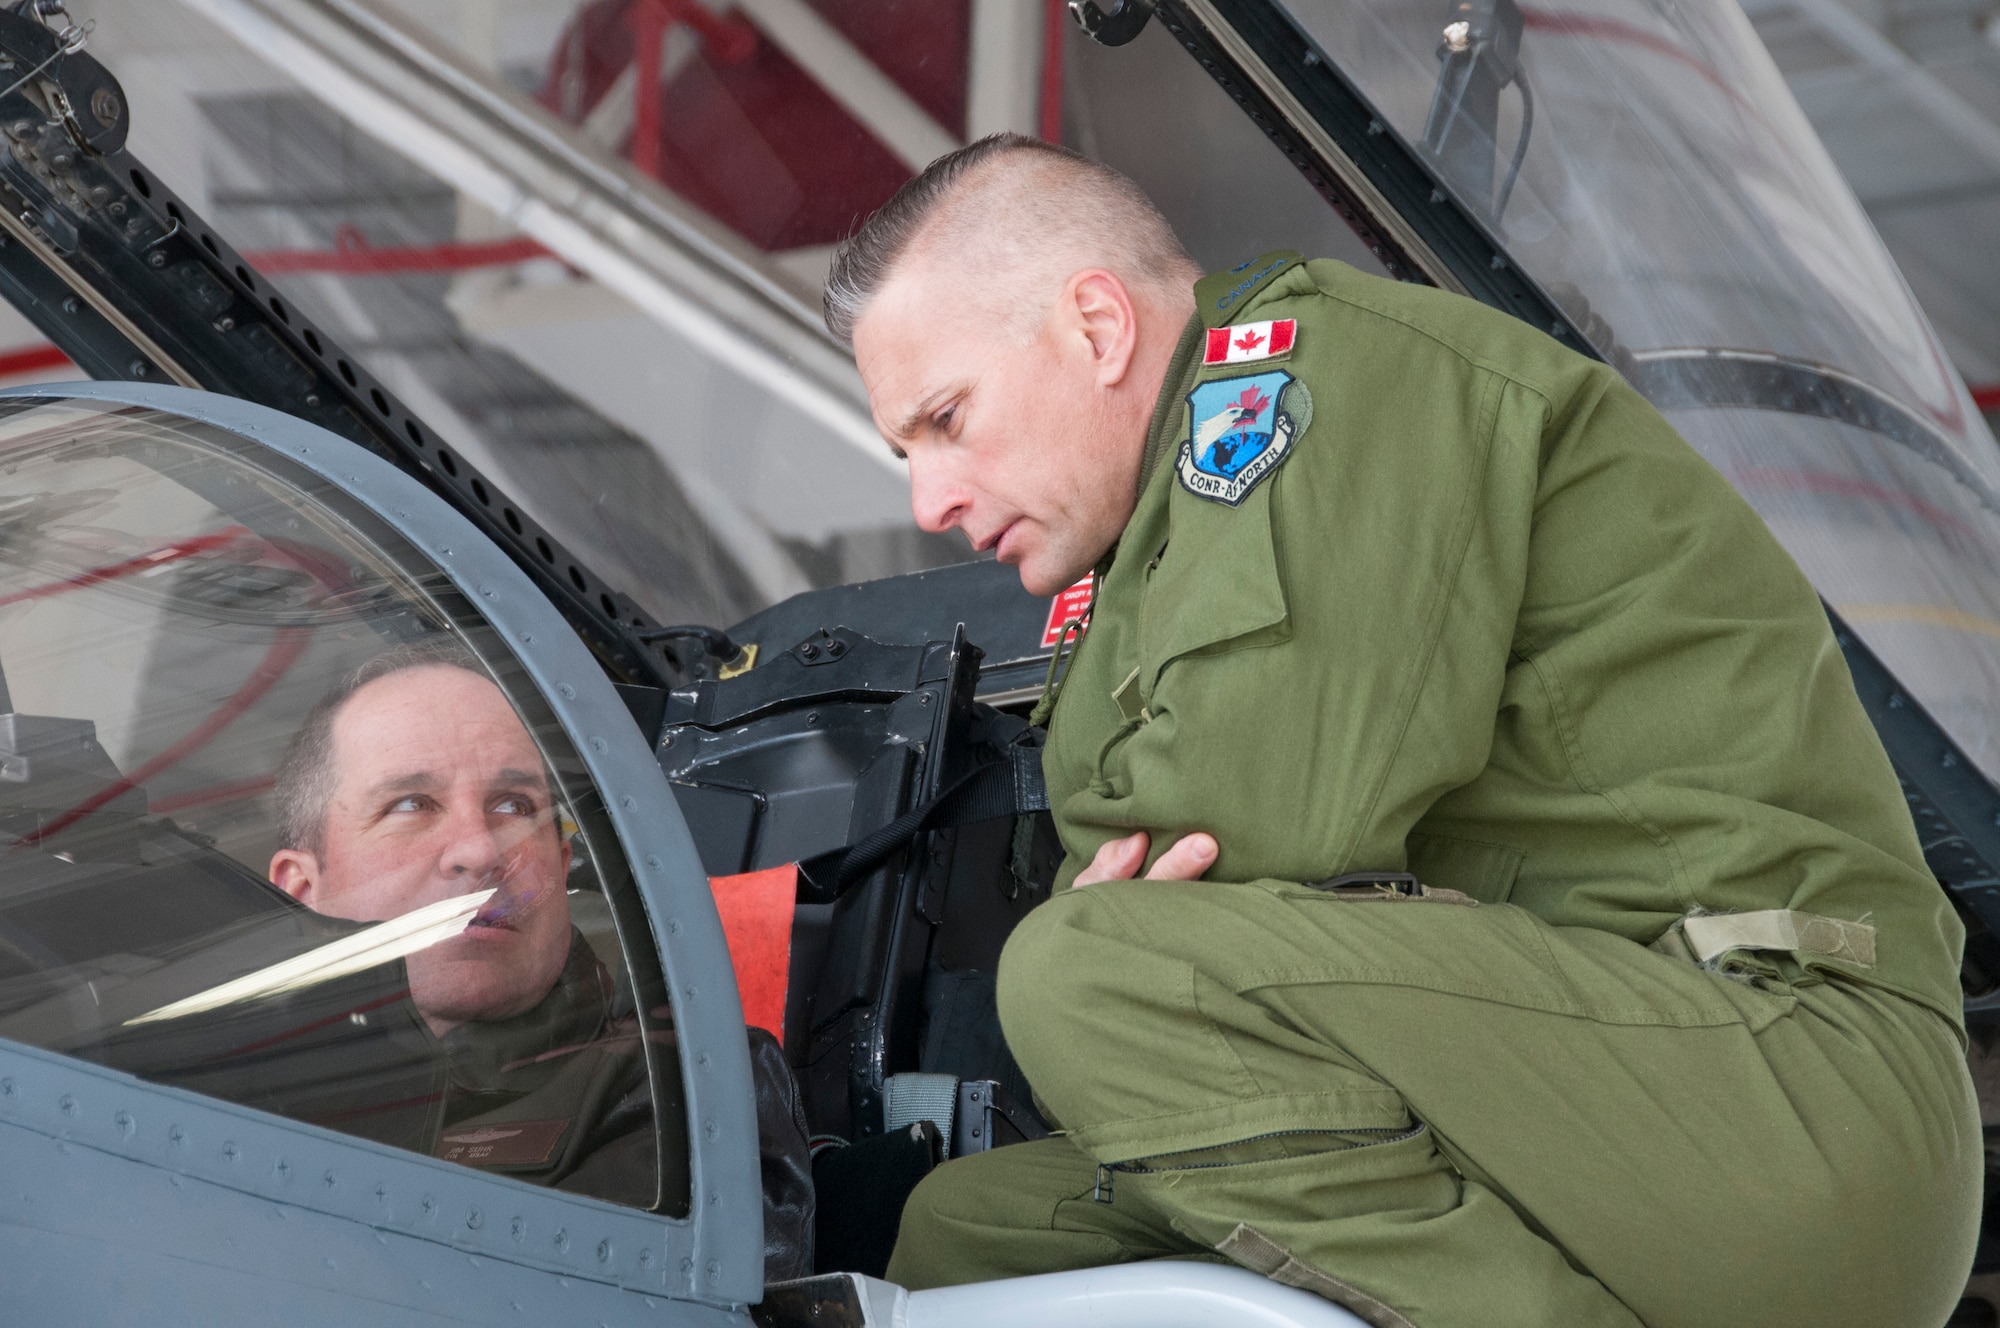 Canadian Forces Brig. Gen. Sylvain Menard, Continental US NORAD Region deputy commander, receives an orientation flight in an F-15 fighter jet and visits with air crew members during his visit to Massachusetts Air National Guard's  104th Fighter Wing at Barnes Air National Guard Base, Mar. 25, 2018. During his visit, Menard spoke to wing leadership about its homeland defense mission and its relationship with CONR to ensure continental United States aerospace control.